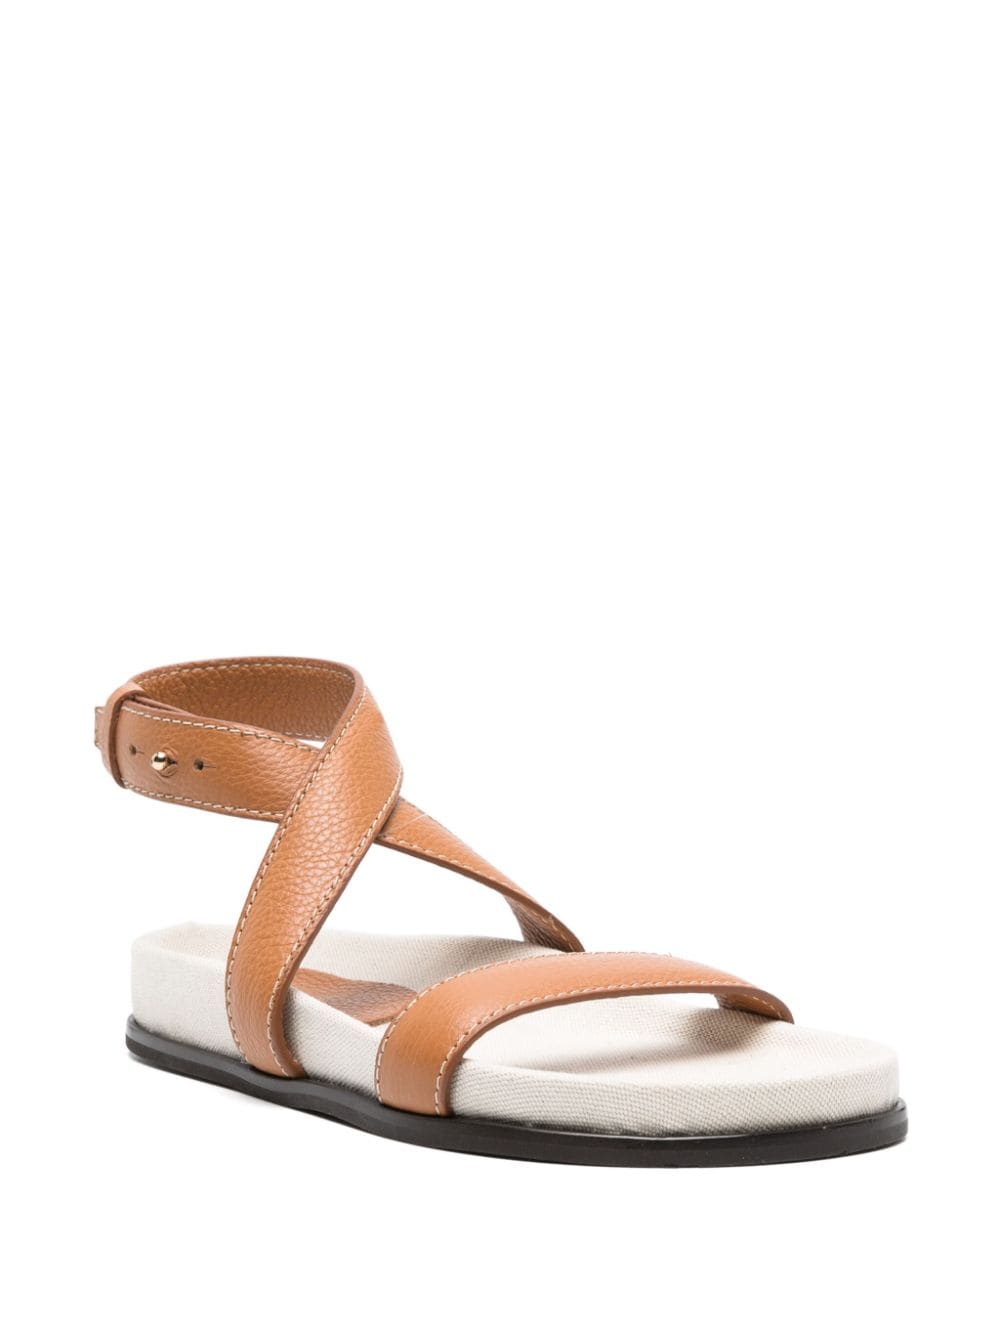 TOTEME The Chunky leather sandals - Beige